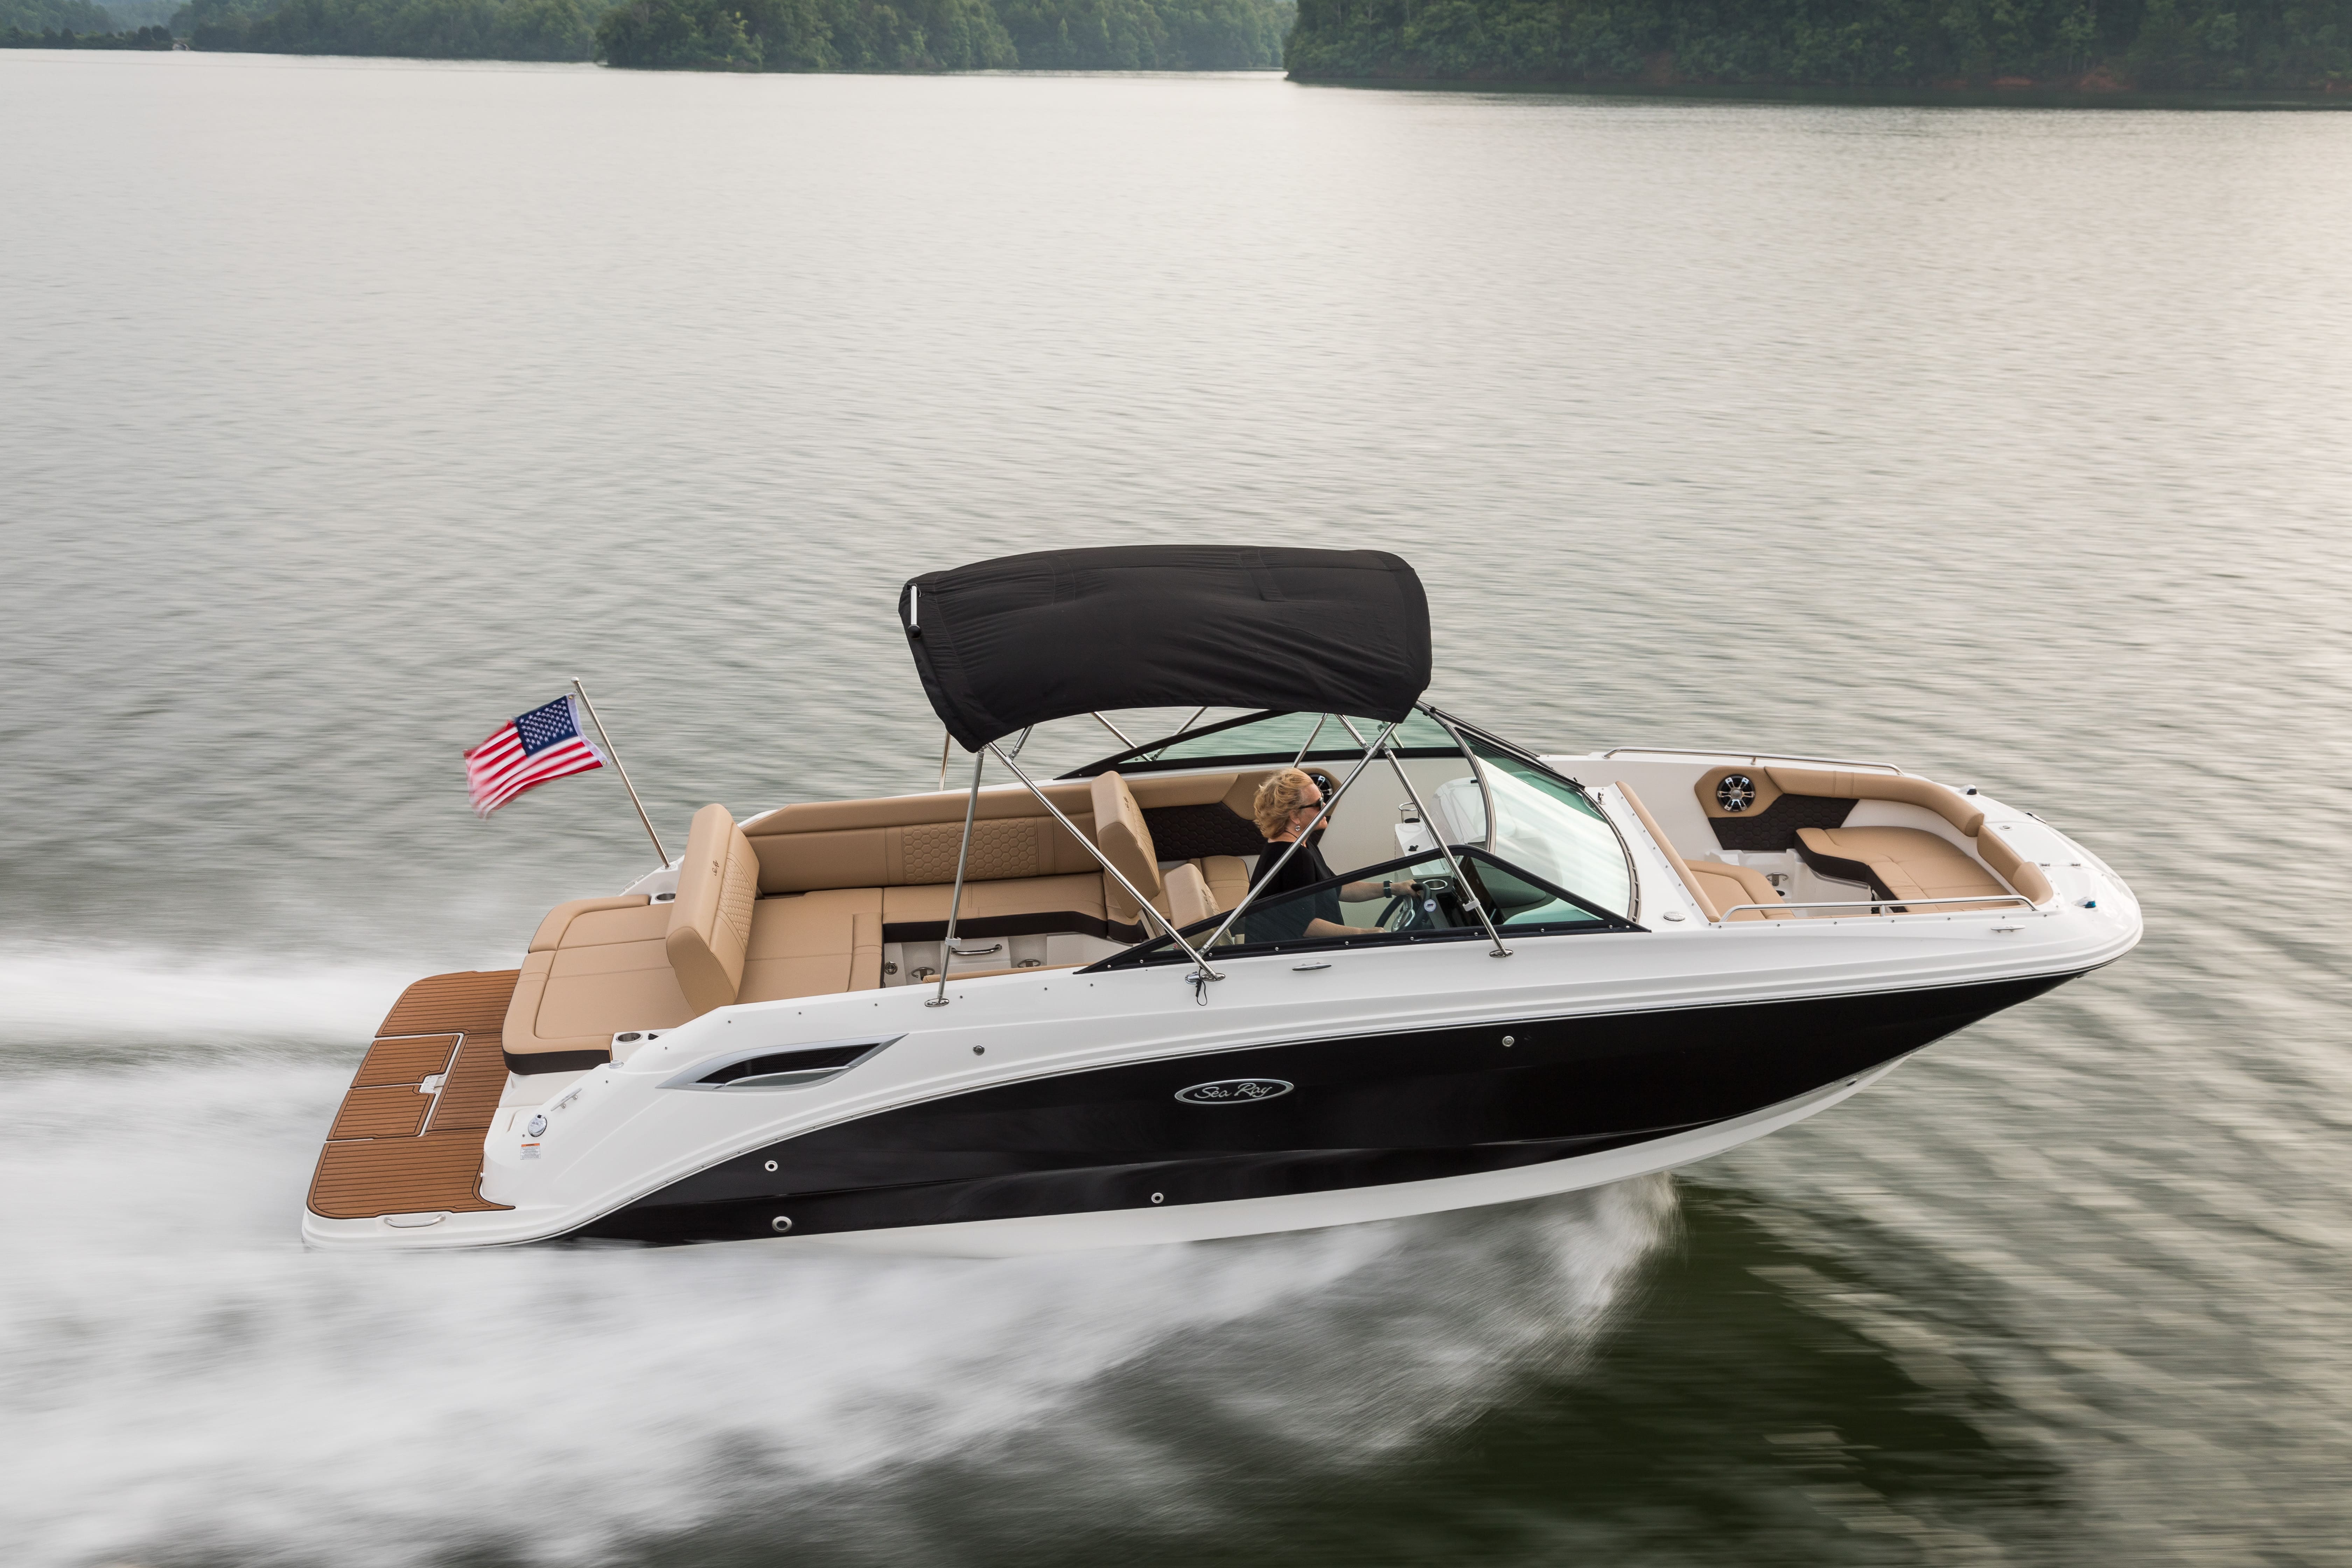 The new Sea Ray 250 SDX is available for immediate delivery